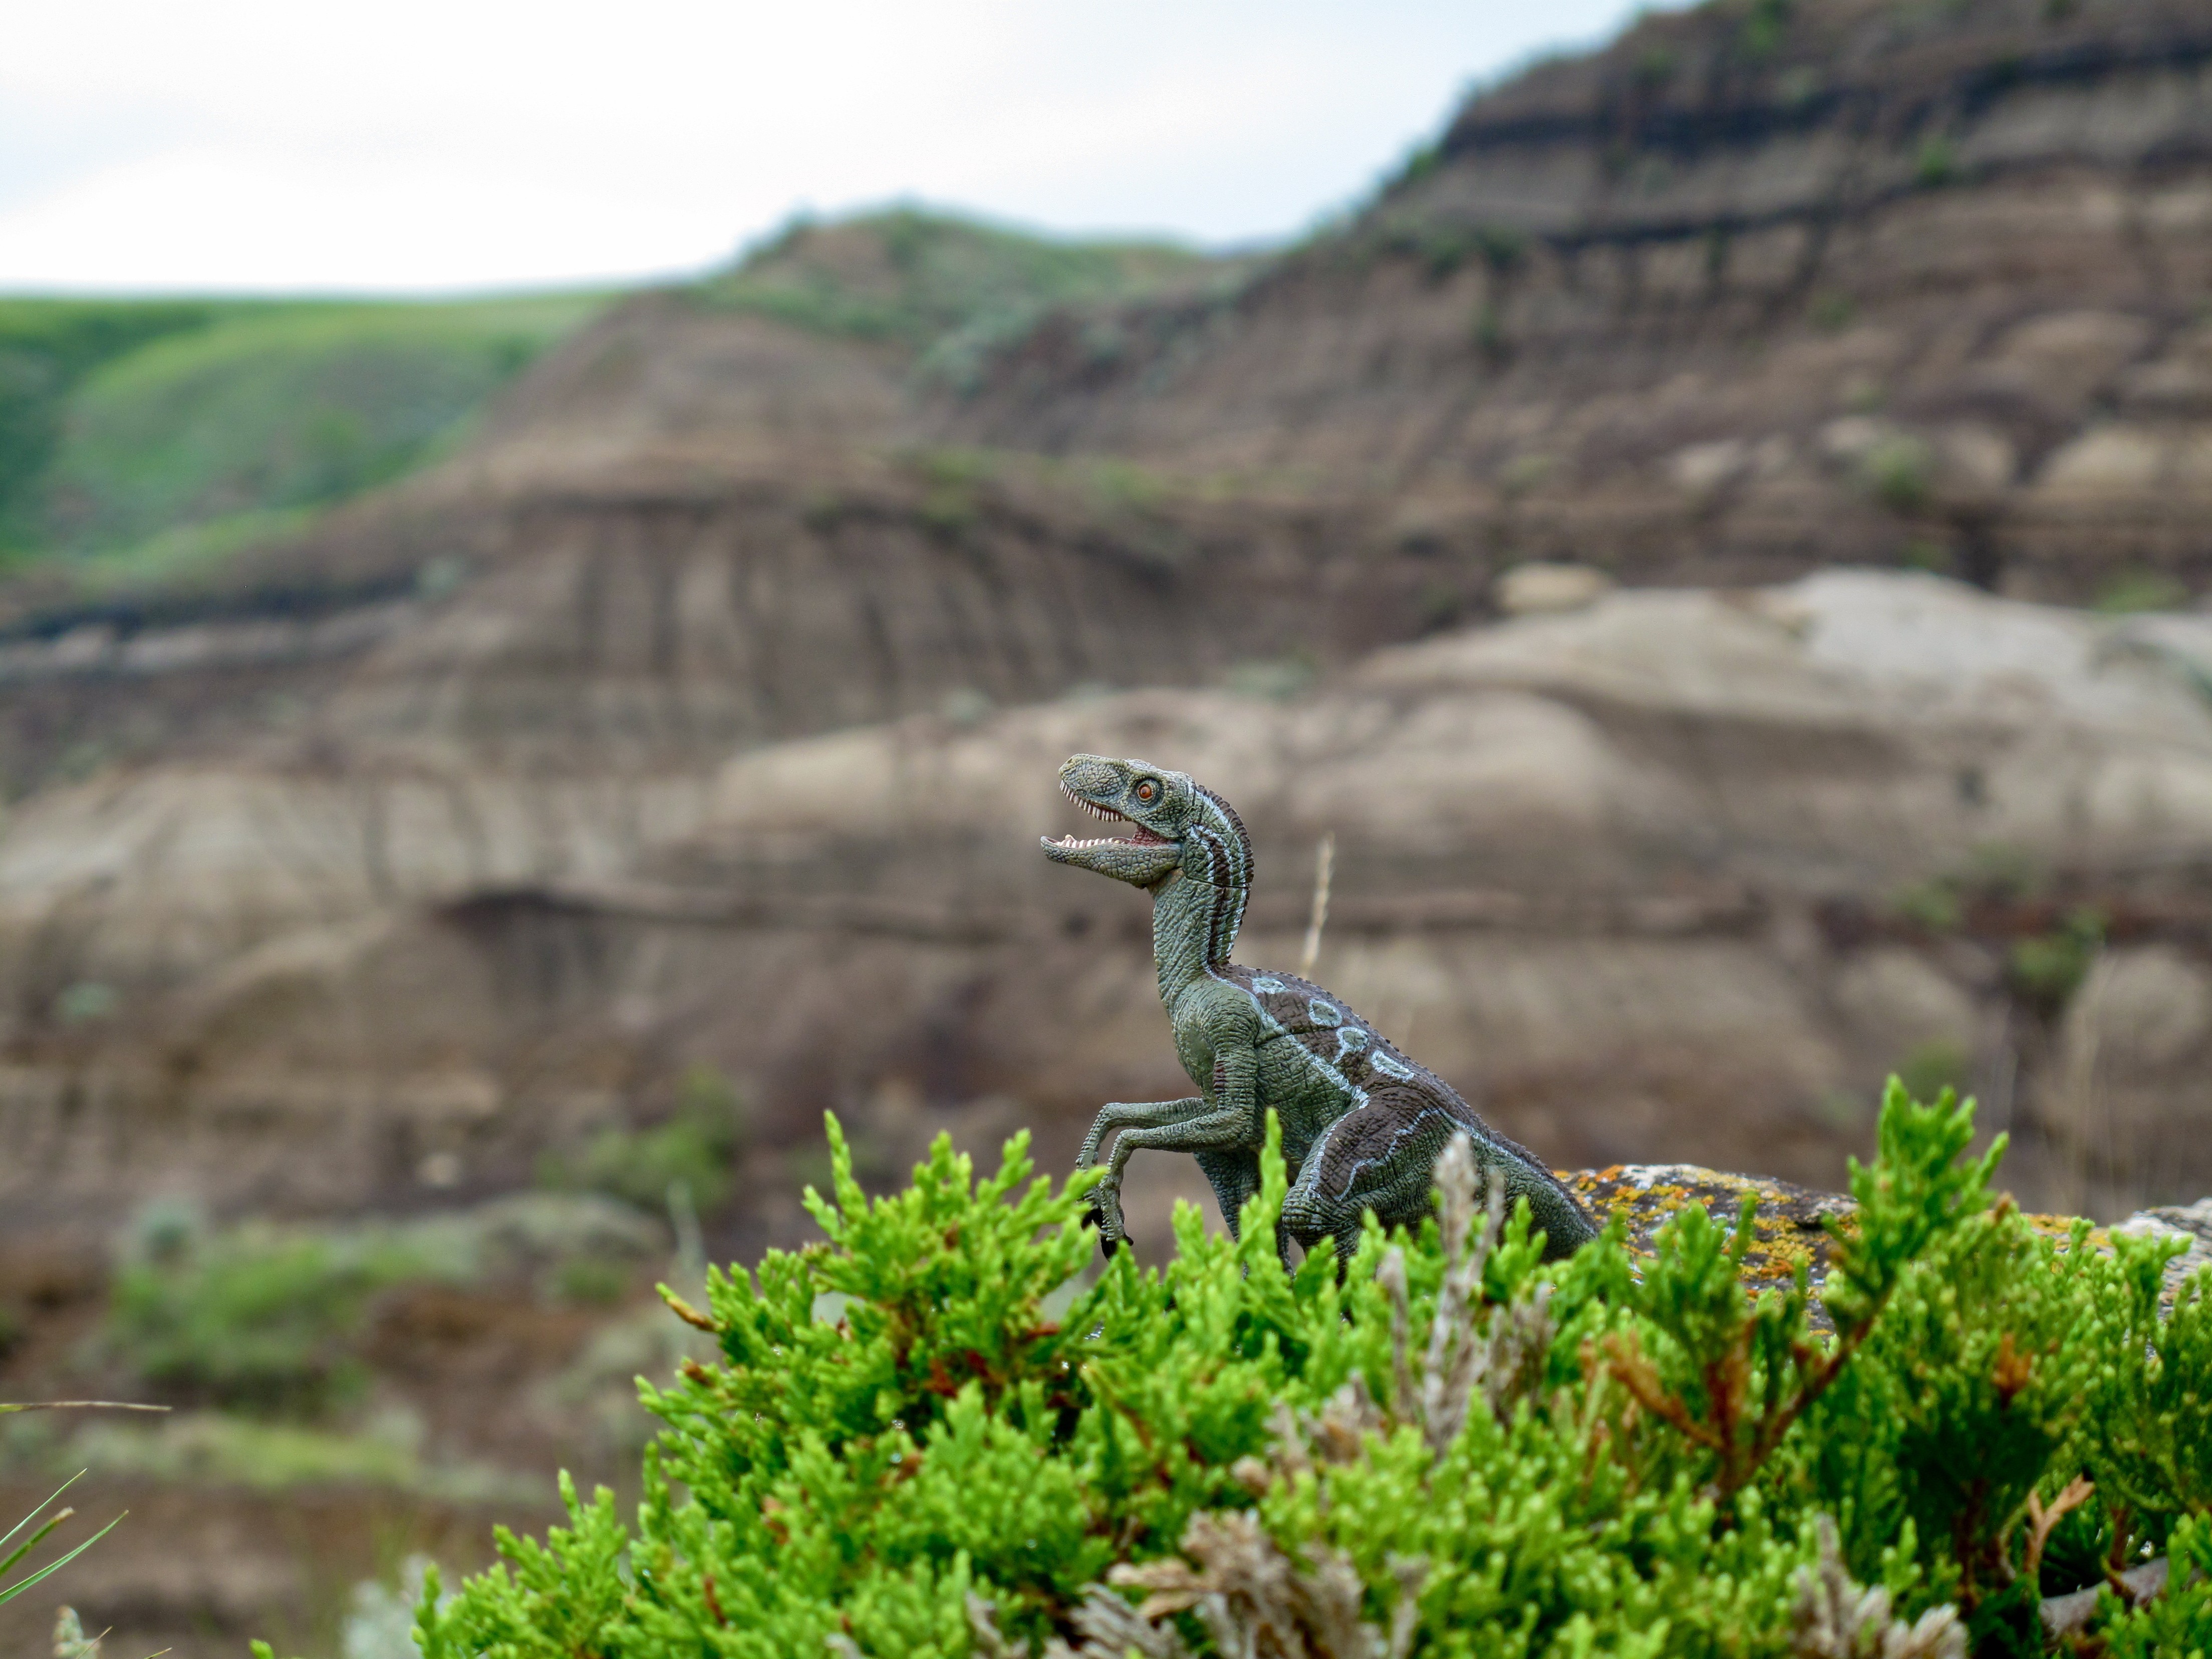 General 4416x3312 dinosaurs nature toys mountains depth of field